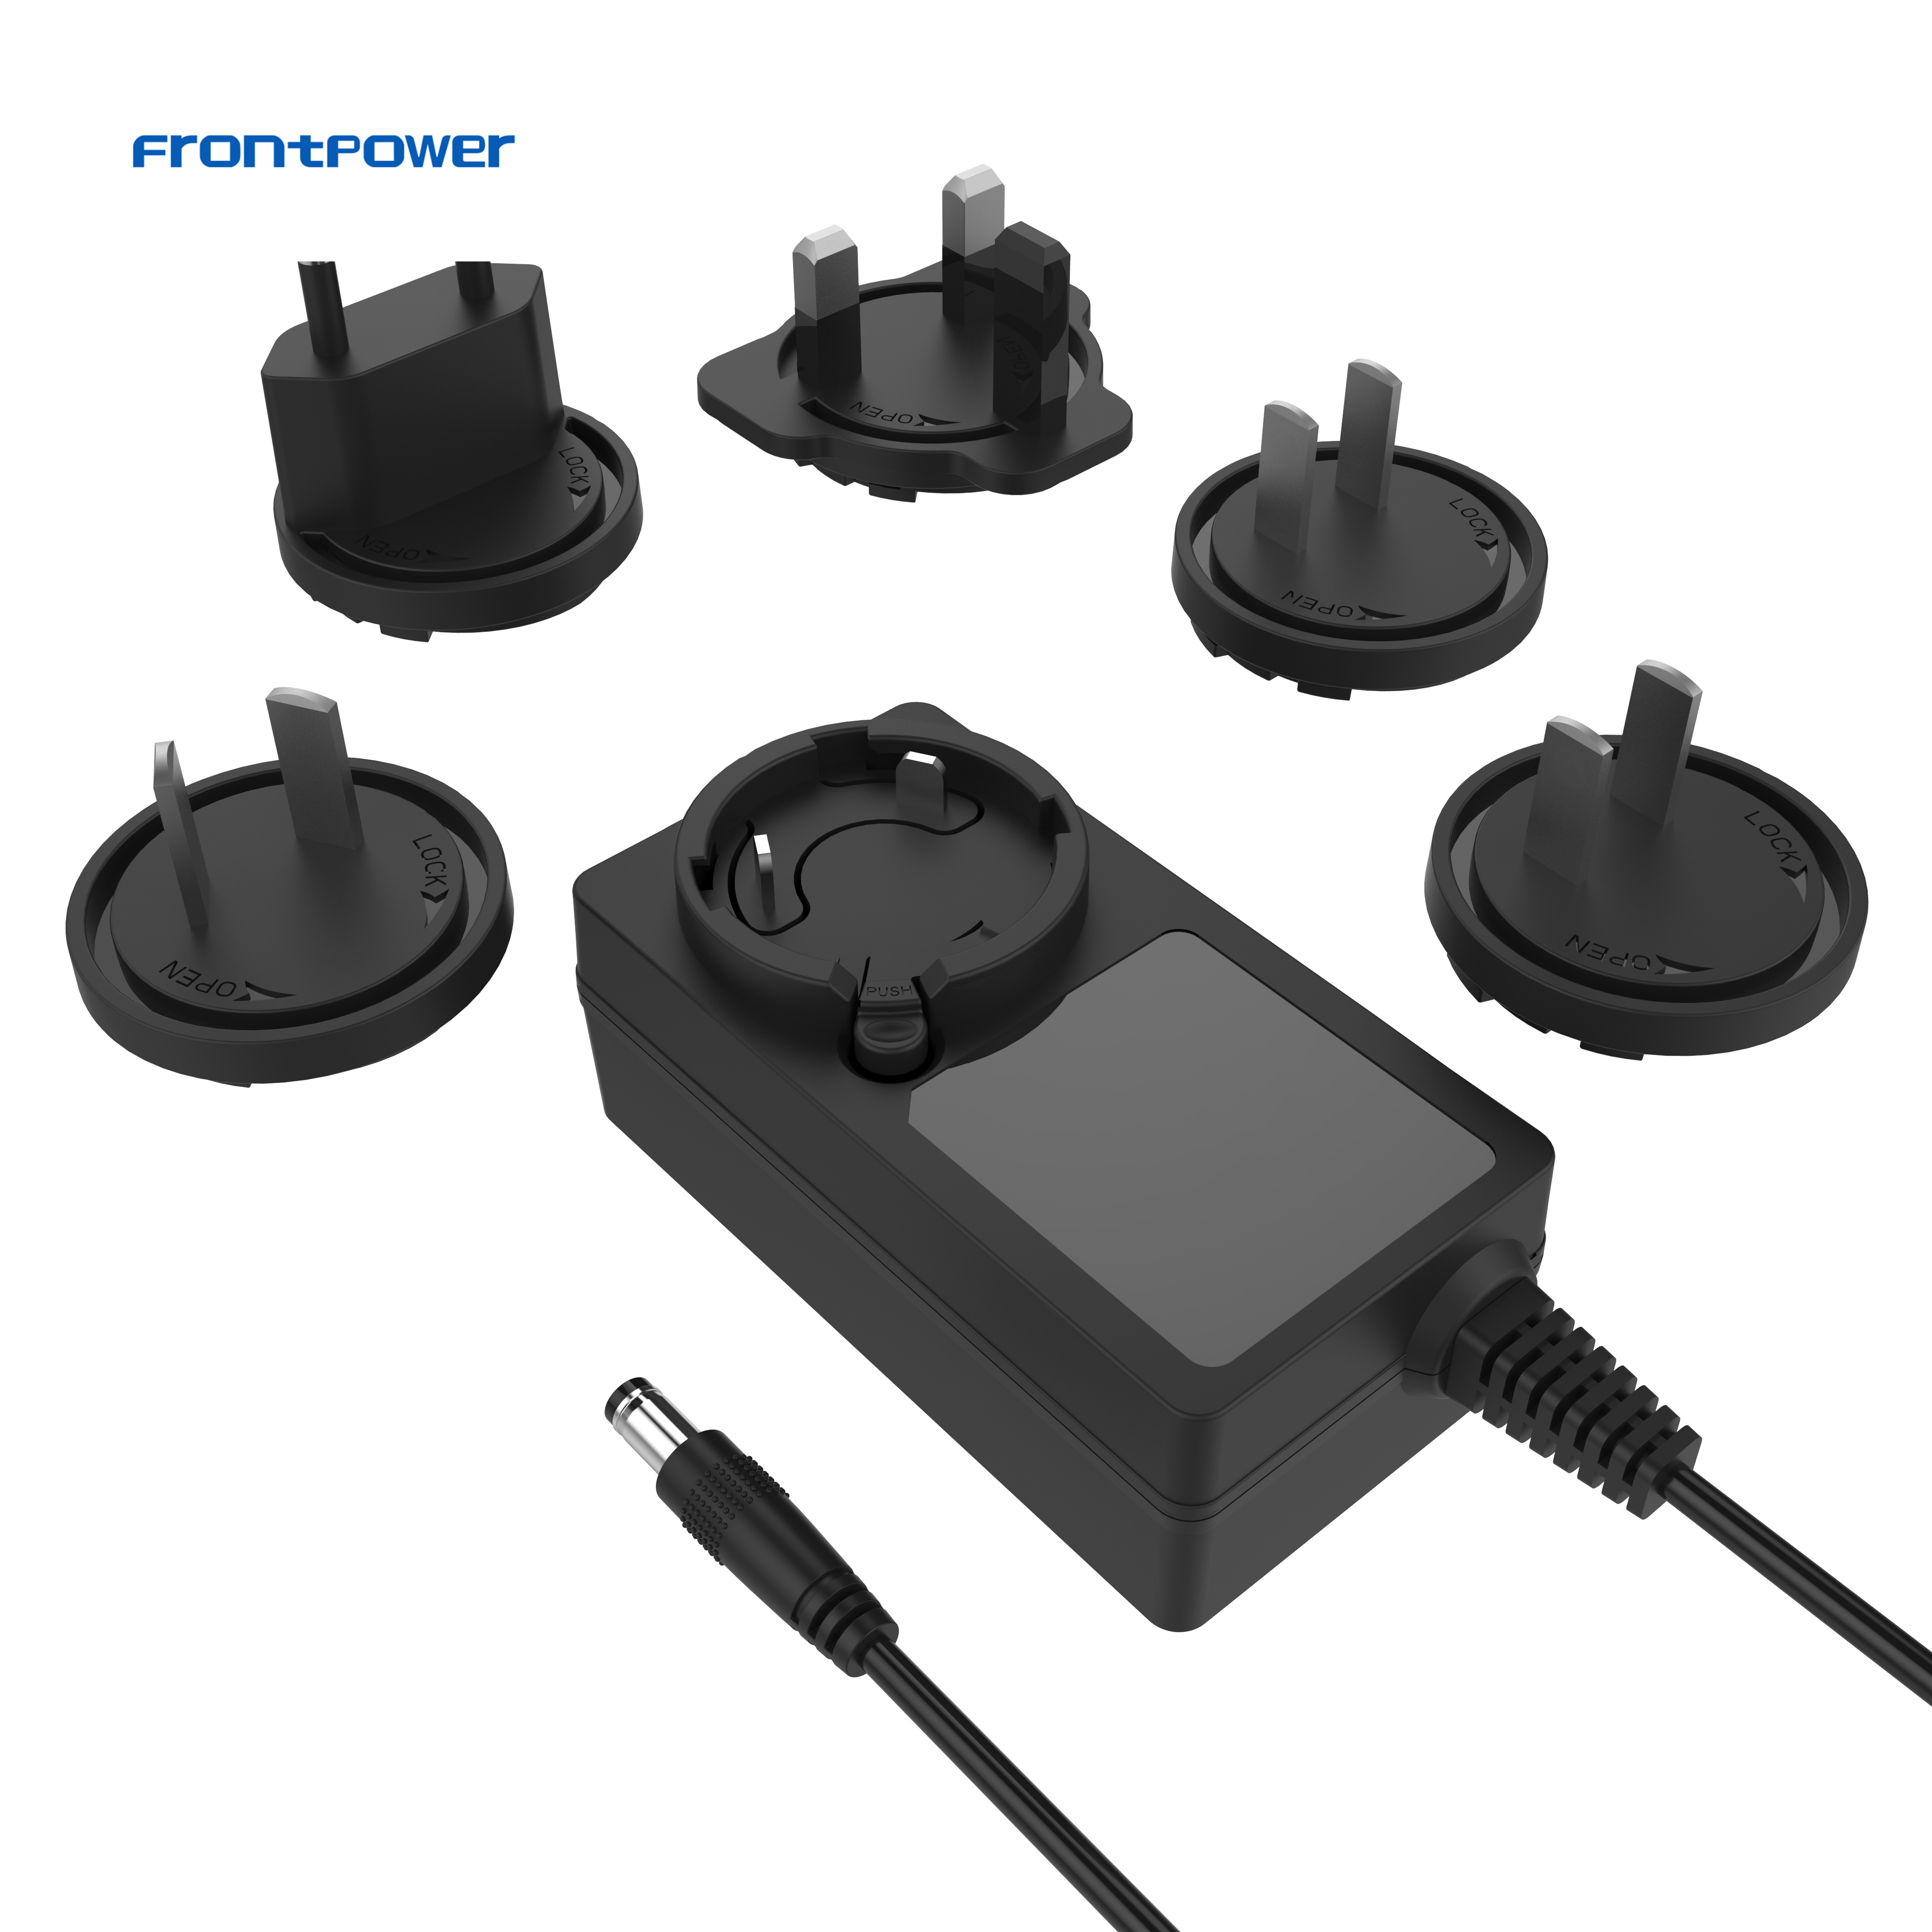 5V 9V 9.3V 12V 15V 24V 1.5A 2.4A 3A 4A 5A 6A US EU UK AU Interchangeable Plug Power Adapter Supply ACDC Charger